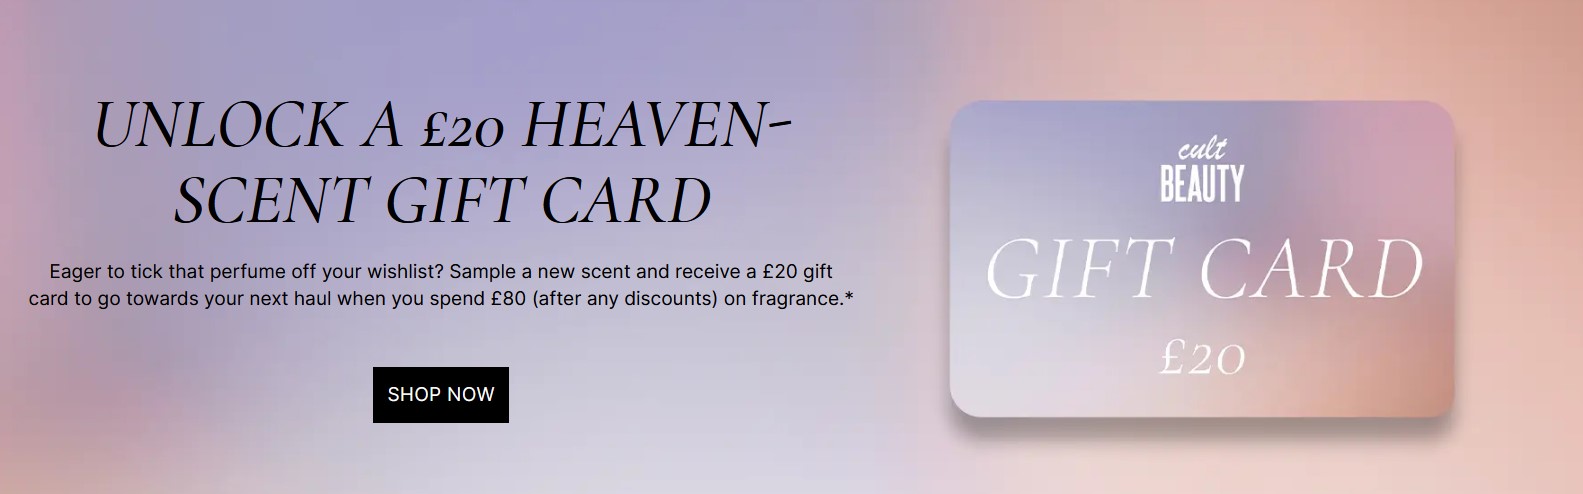 Receive a £20 gift card when you spend £80 on Fragrance at Cult Beauty